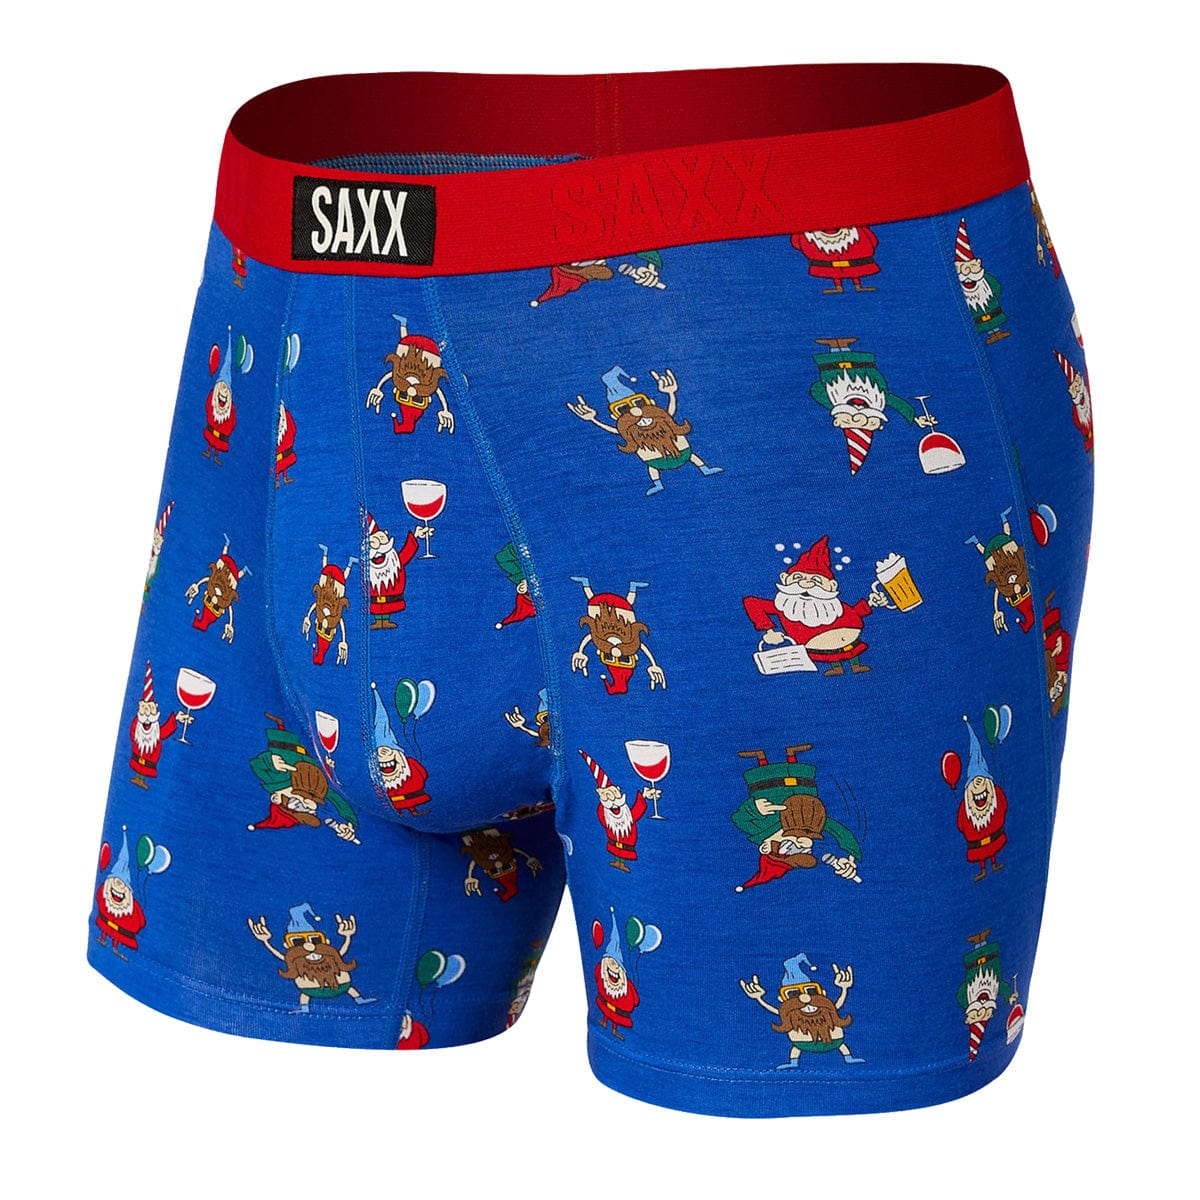 Saxx Vibe Boxers - Peak Blue Party Gnomes - The Hockey Shop Source For Sports